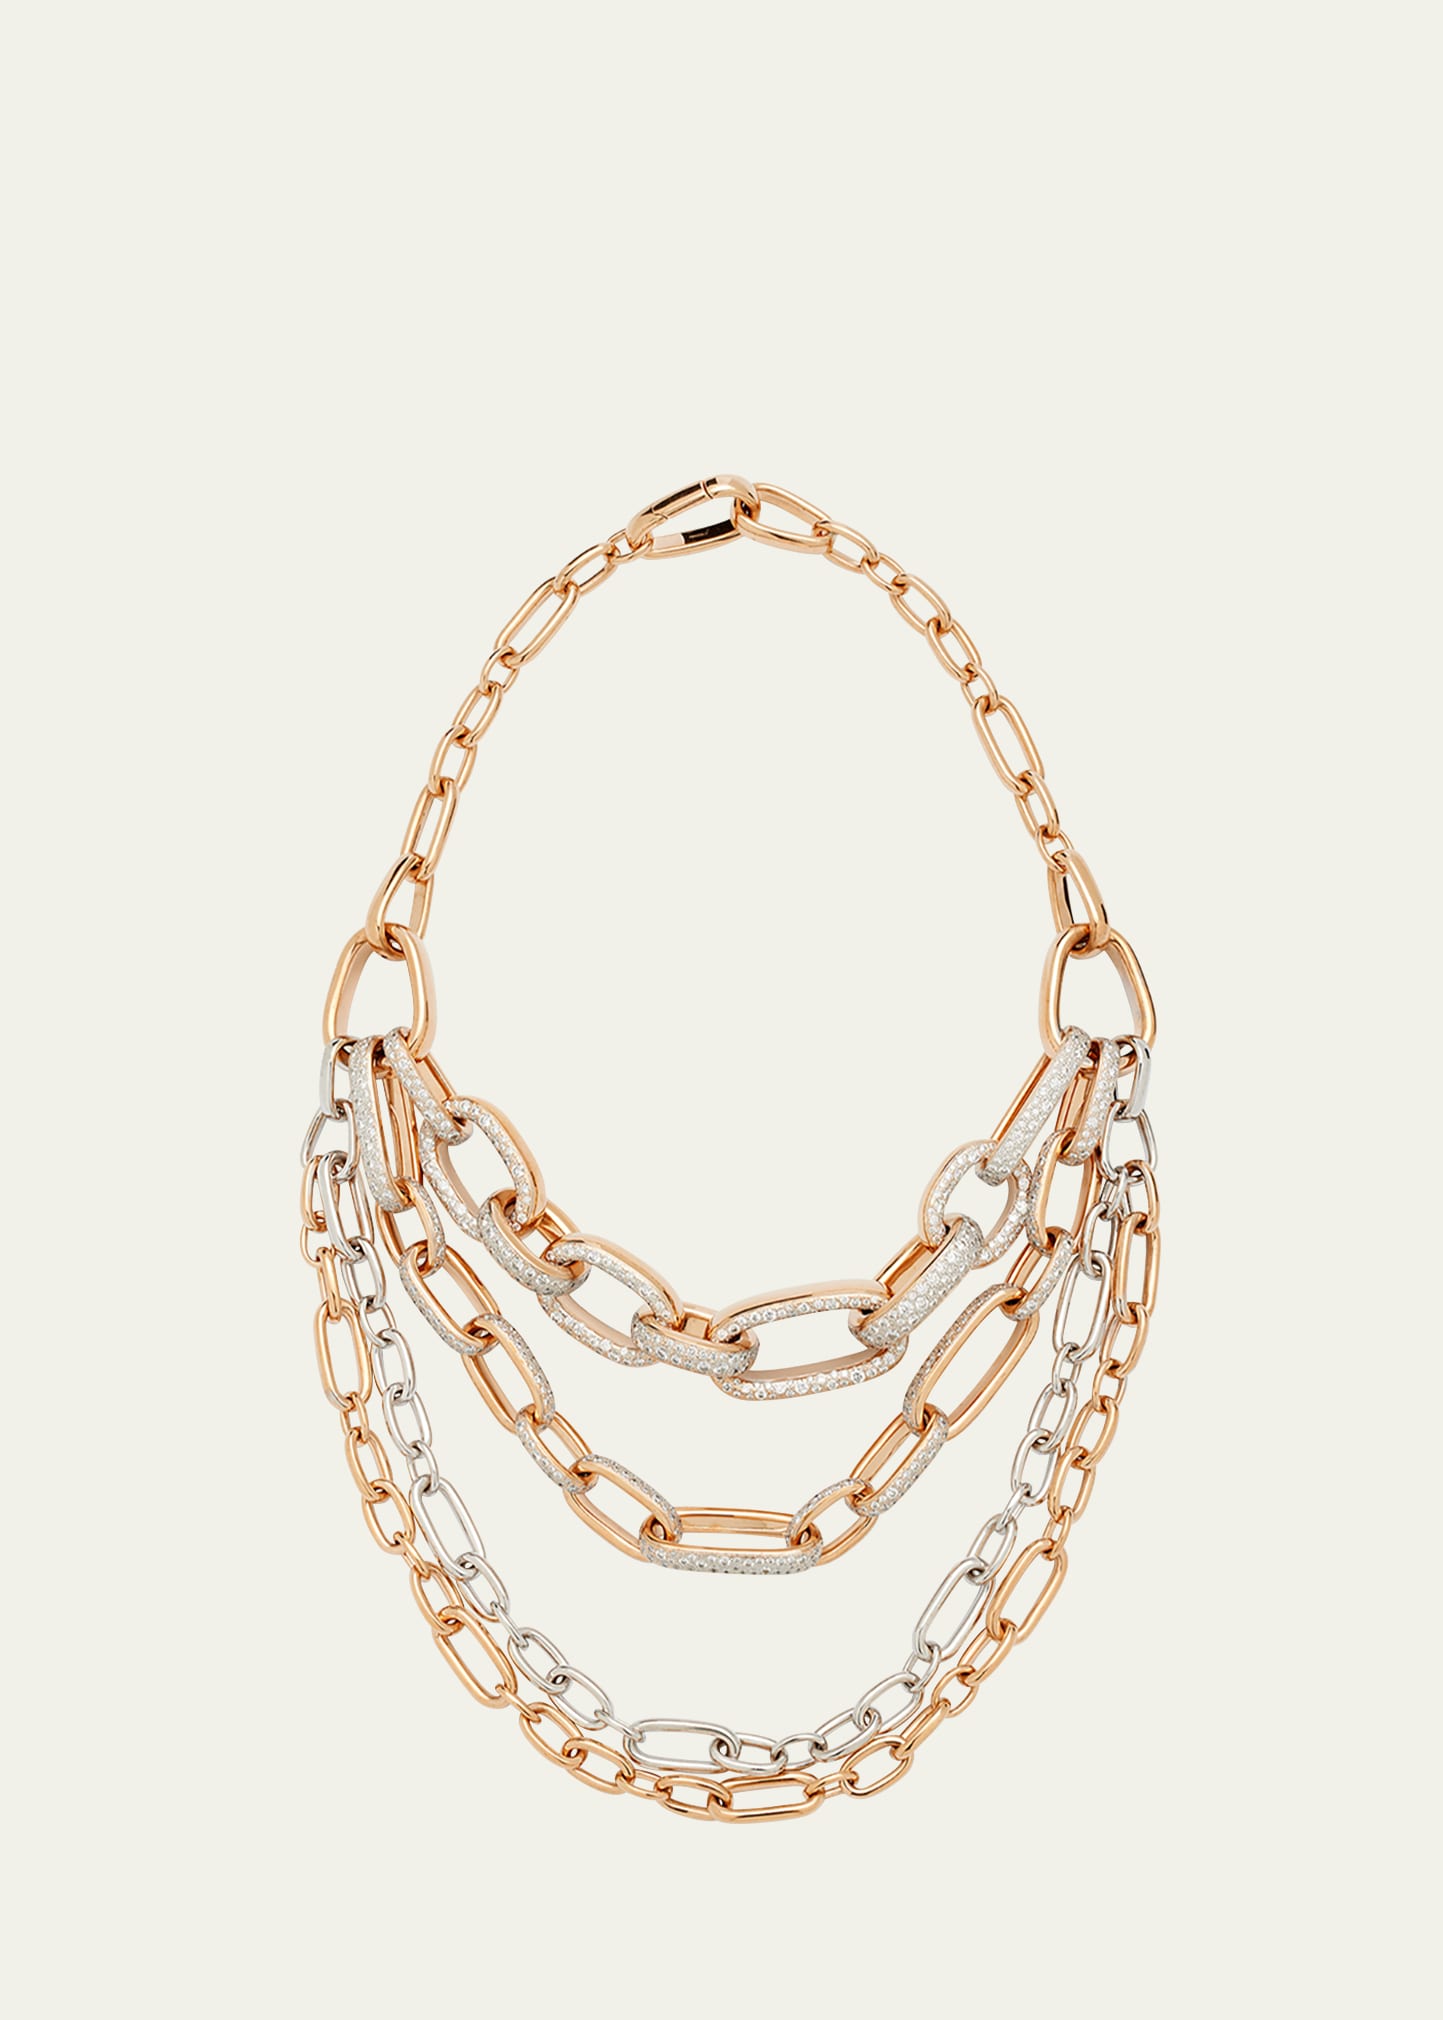 Iconica Bravarole Rose Gold and White Gold Necklace with Diamonds